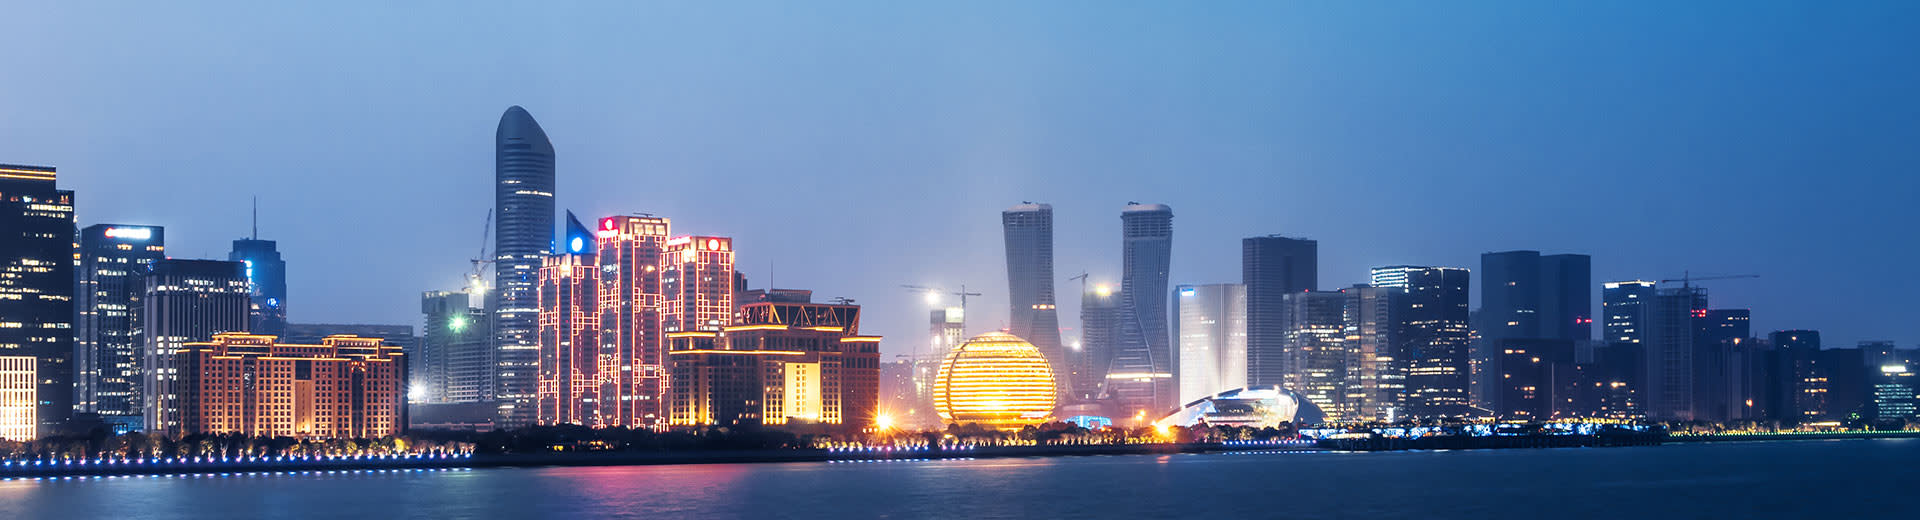 A sparkling array of skyscrapers light up the night sky in Hangzhou.